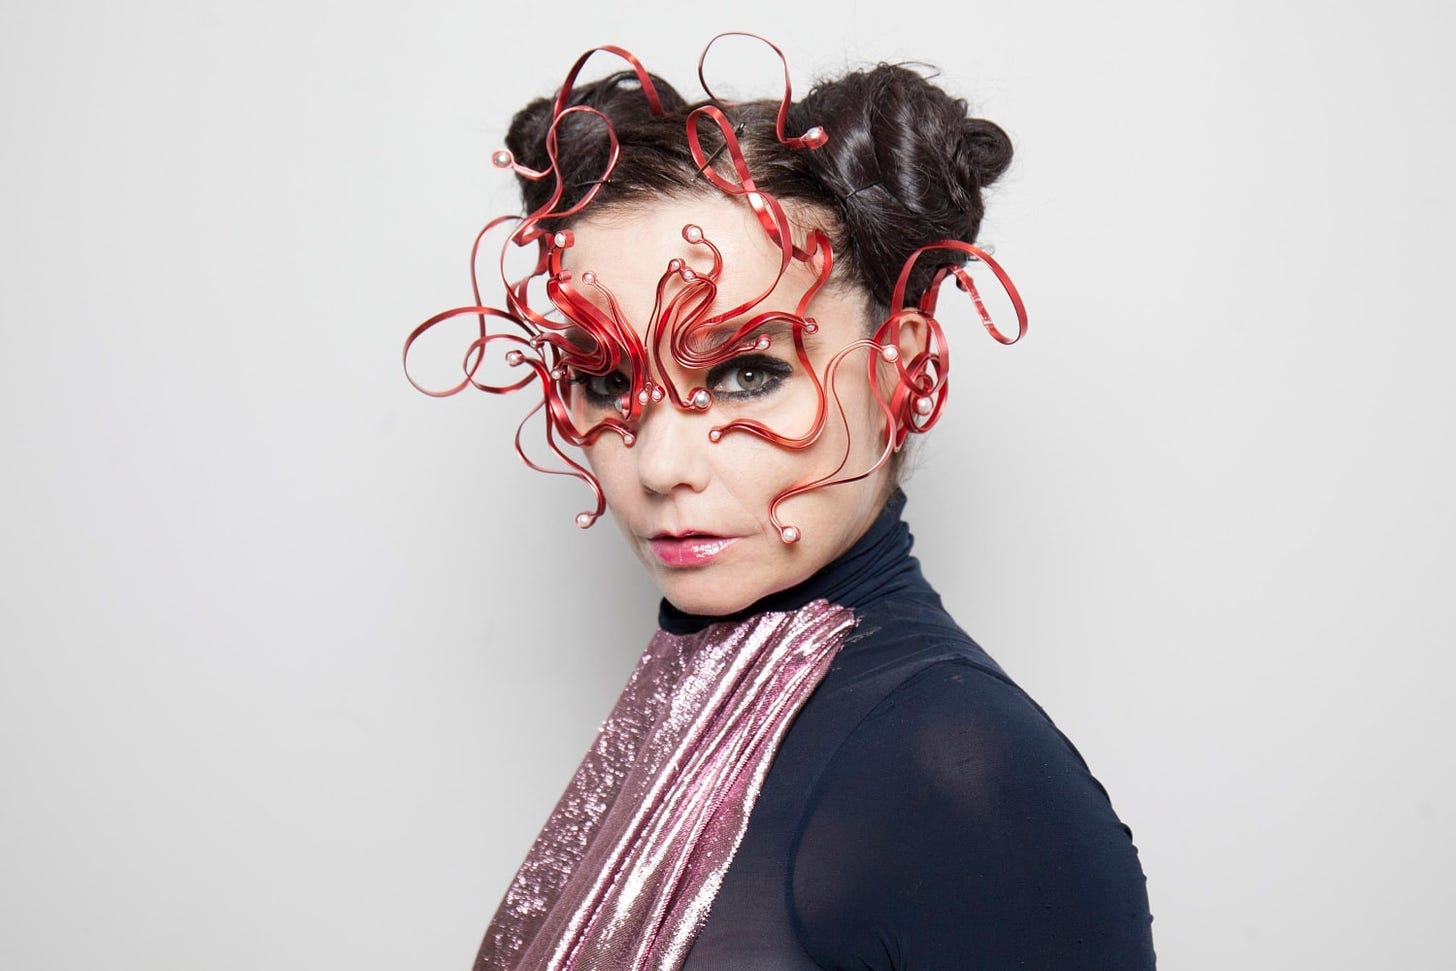 5 things we didn't know about Björk